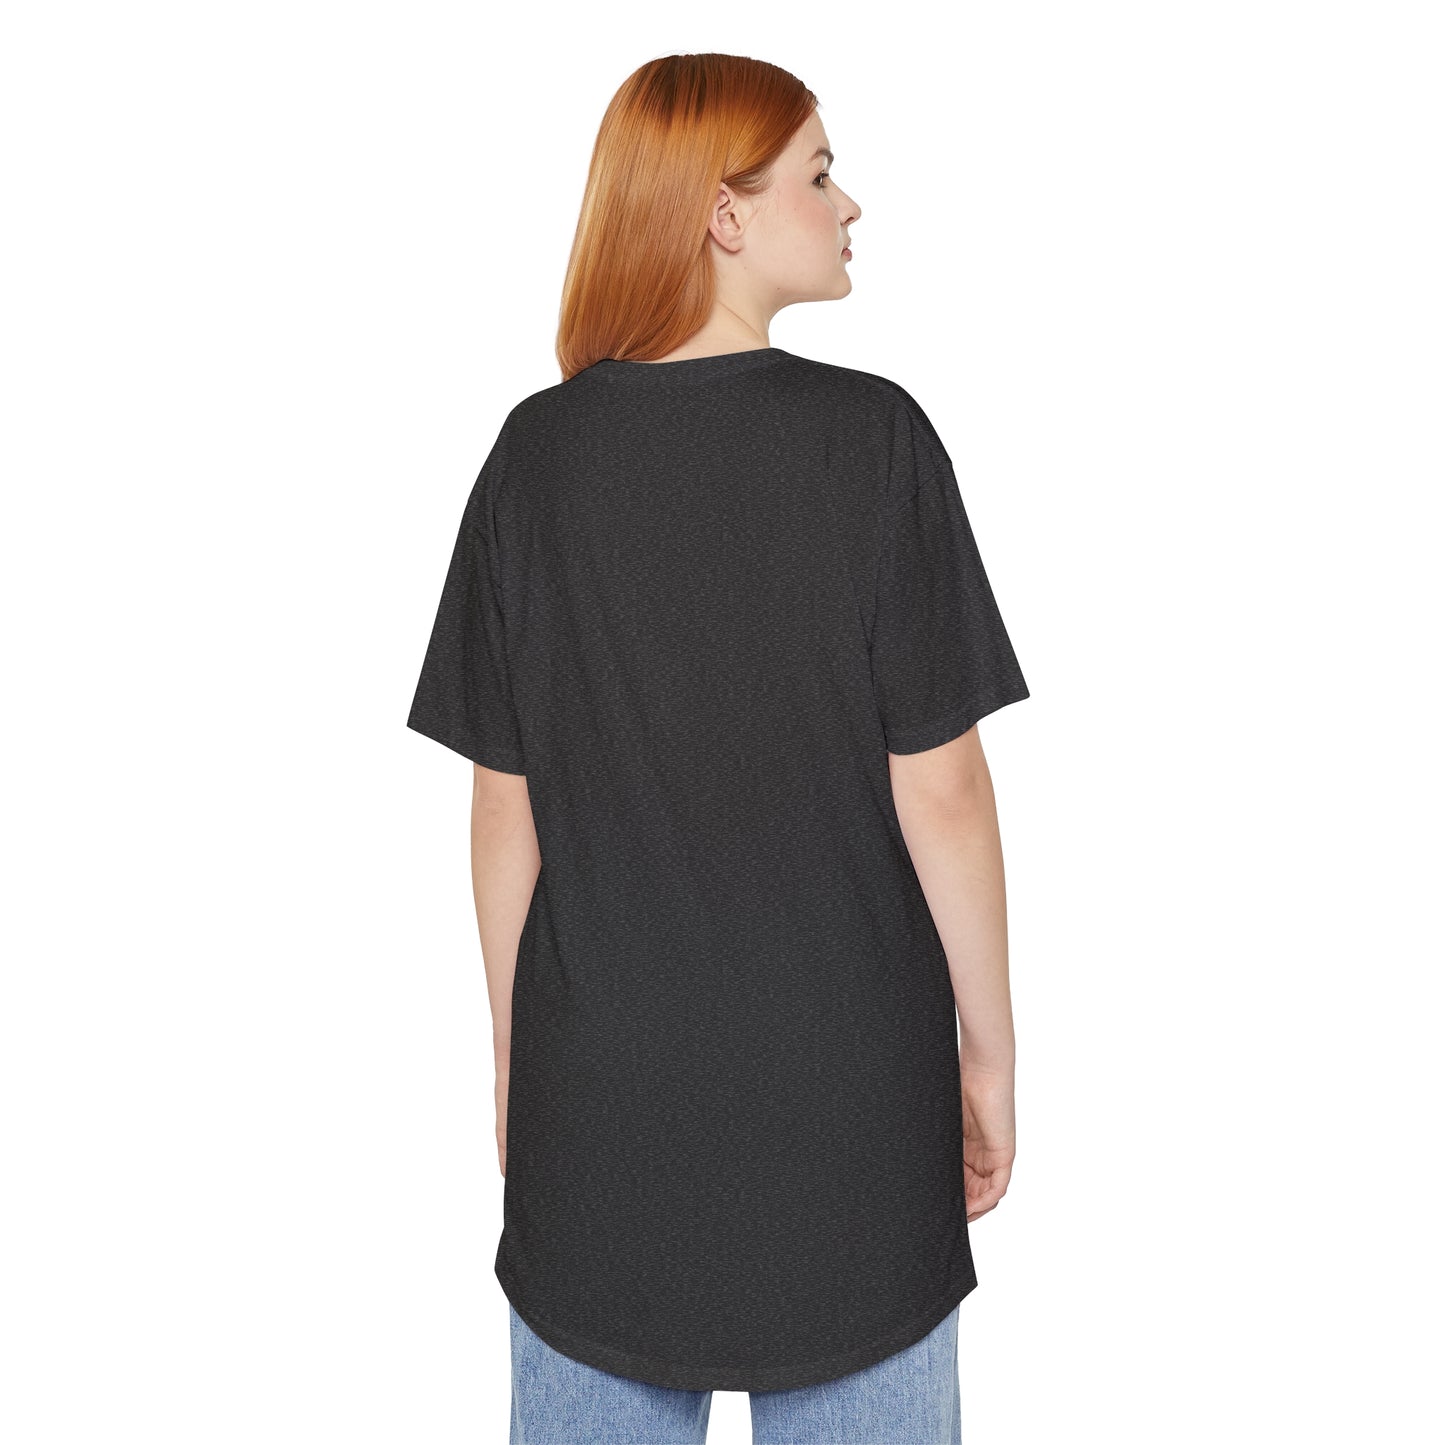 What's Growing On? Unisex Long Body Urban Tee